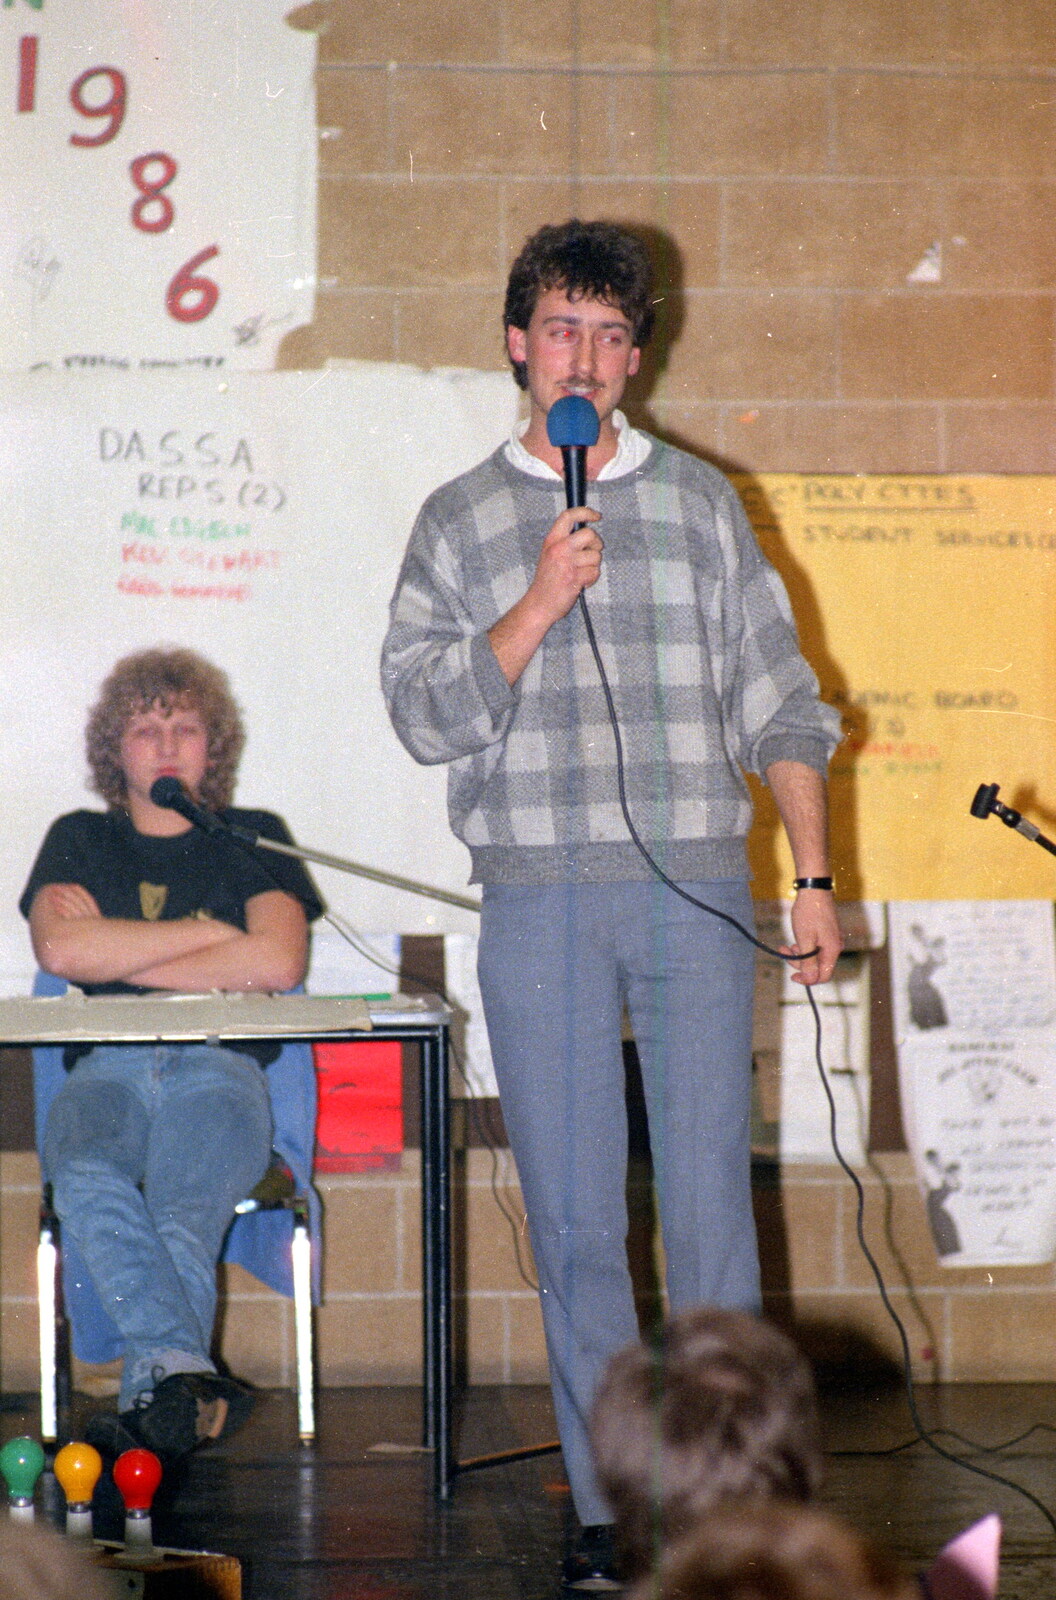 Mark Wilkins gives his speech from Uni: Student Politics, and Hanging Around The Hoe, Plymouth - 12th April 1986